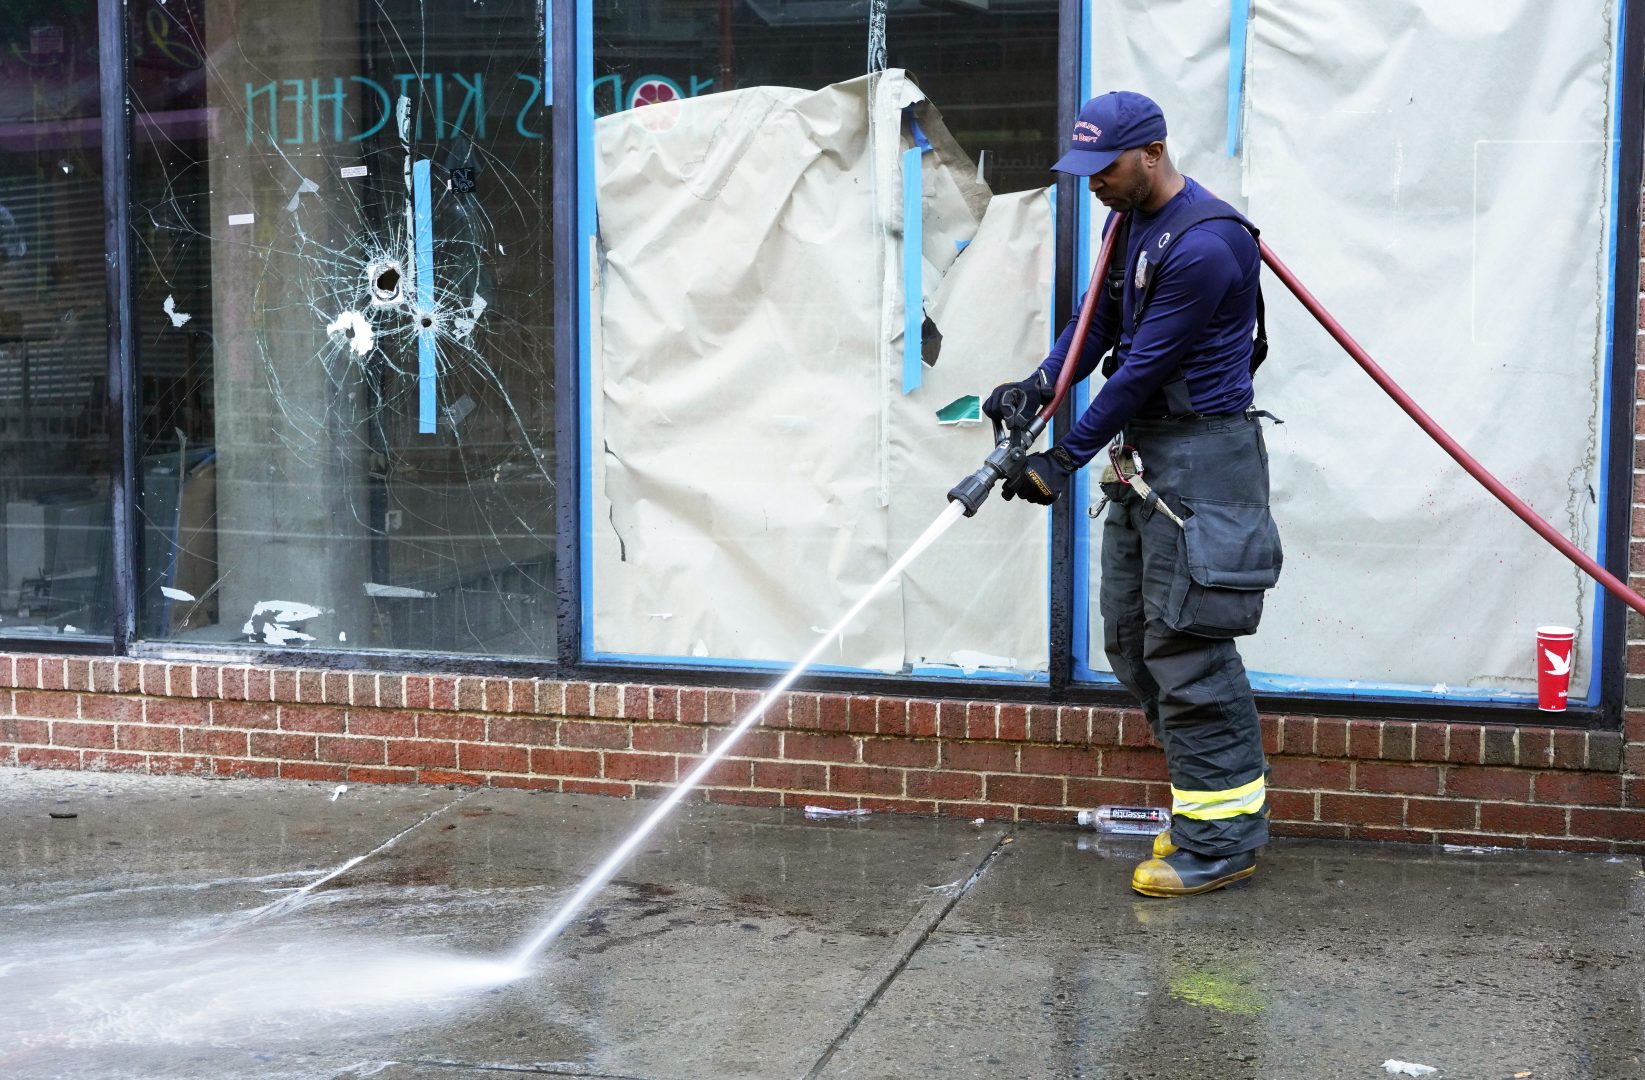  A Philadelphia fireman washes blood off the sidewalk at the scene of a fatal overnight shooting on South Street in Philadelphia, Sunday, June 5, 2022, where bullet holes on a storefront window from a prior shooting can also be seen. 